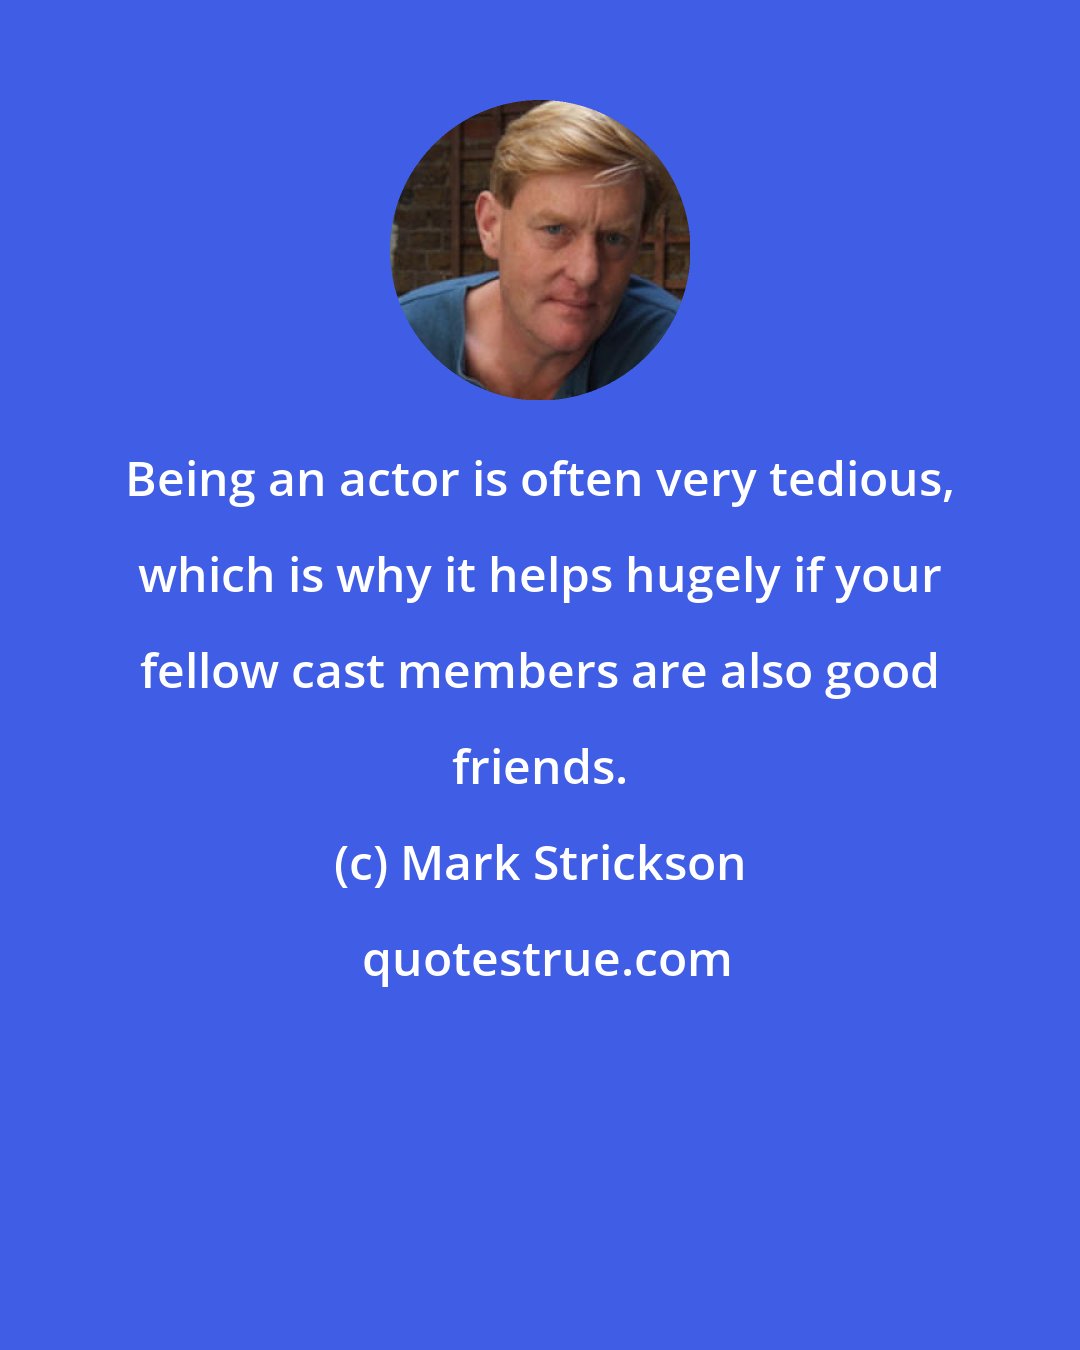 Mark Strickson: Being an actor is often very tedious, which is why it helps hugely if your fellow cast members are also good friends.